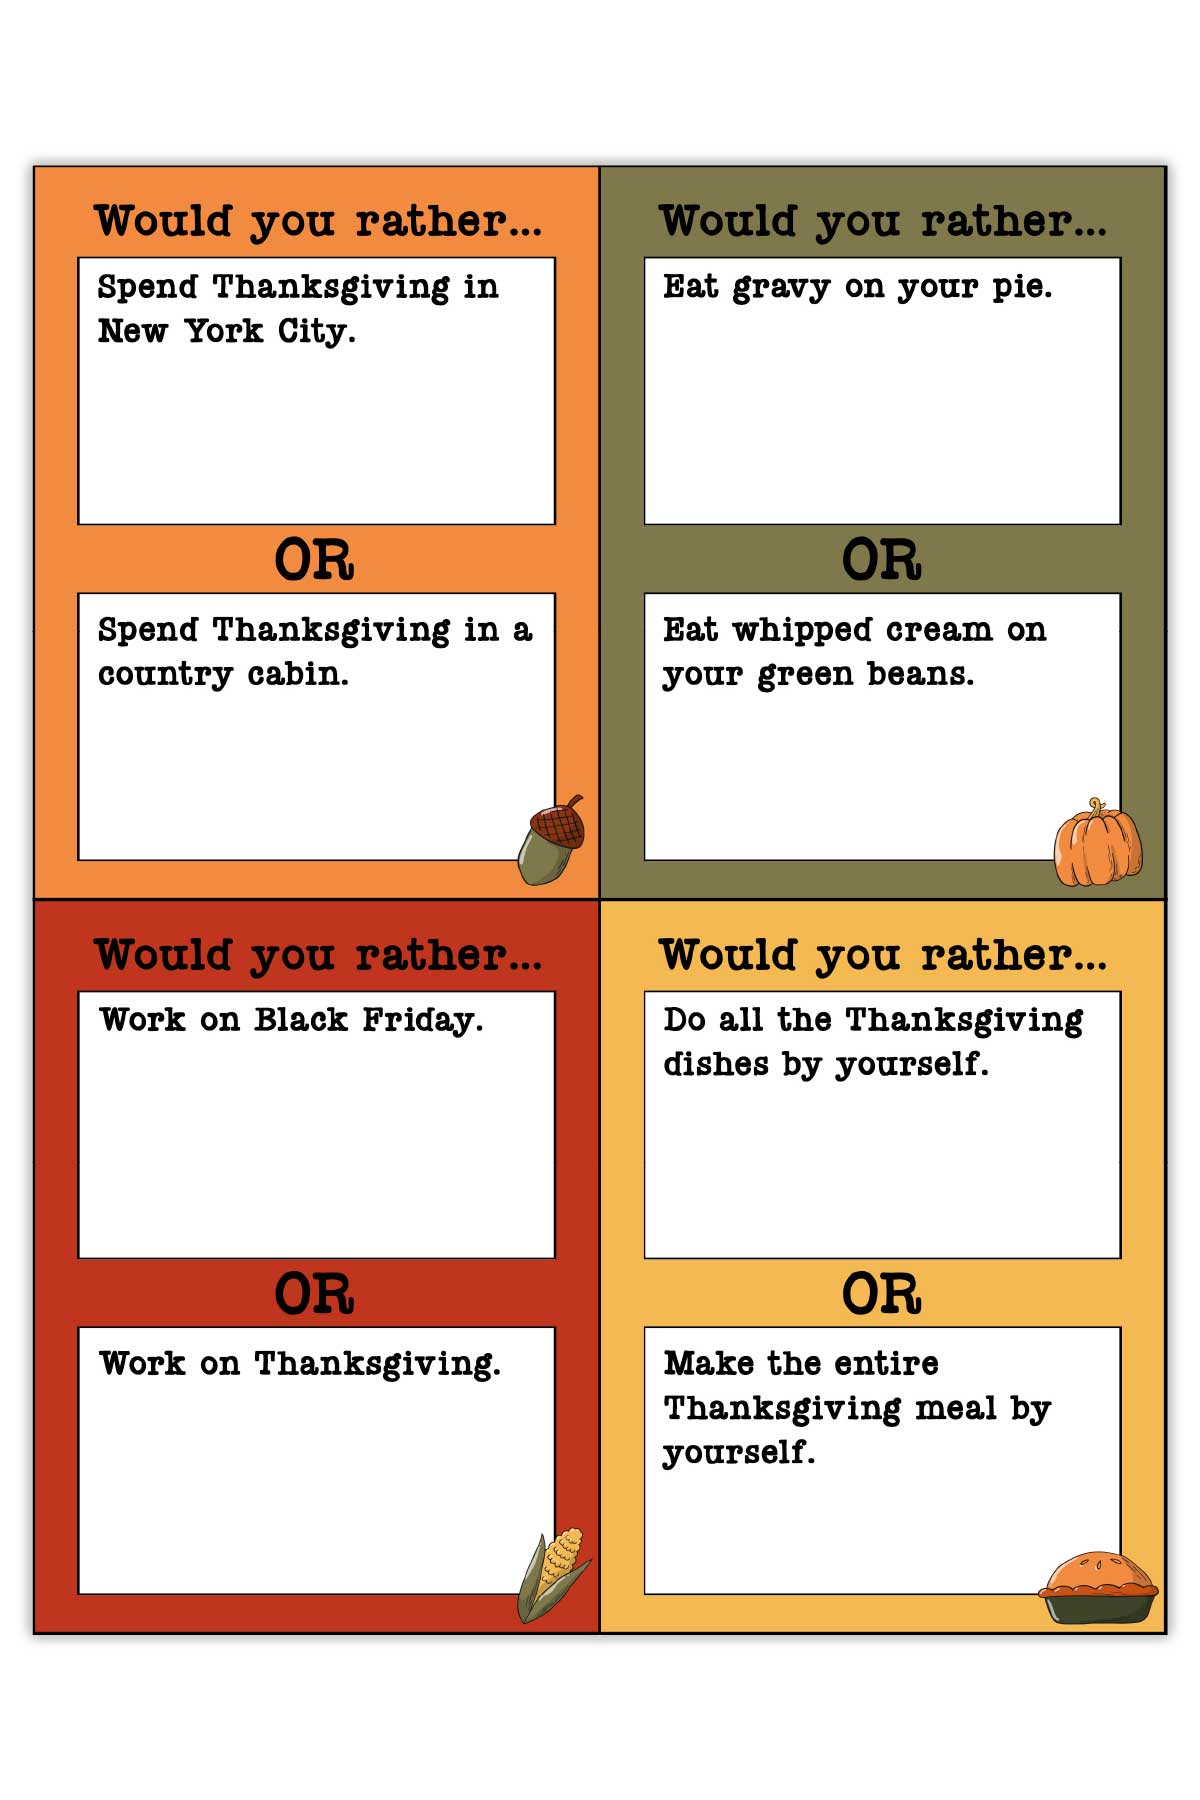 This image shows one of the pages available in the would you rather Thanksgiving games printable set you can get at the end of this blog post.